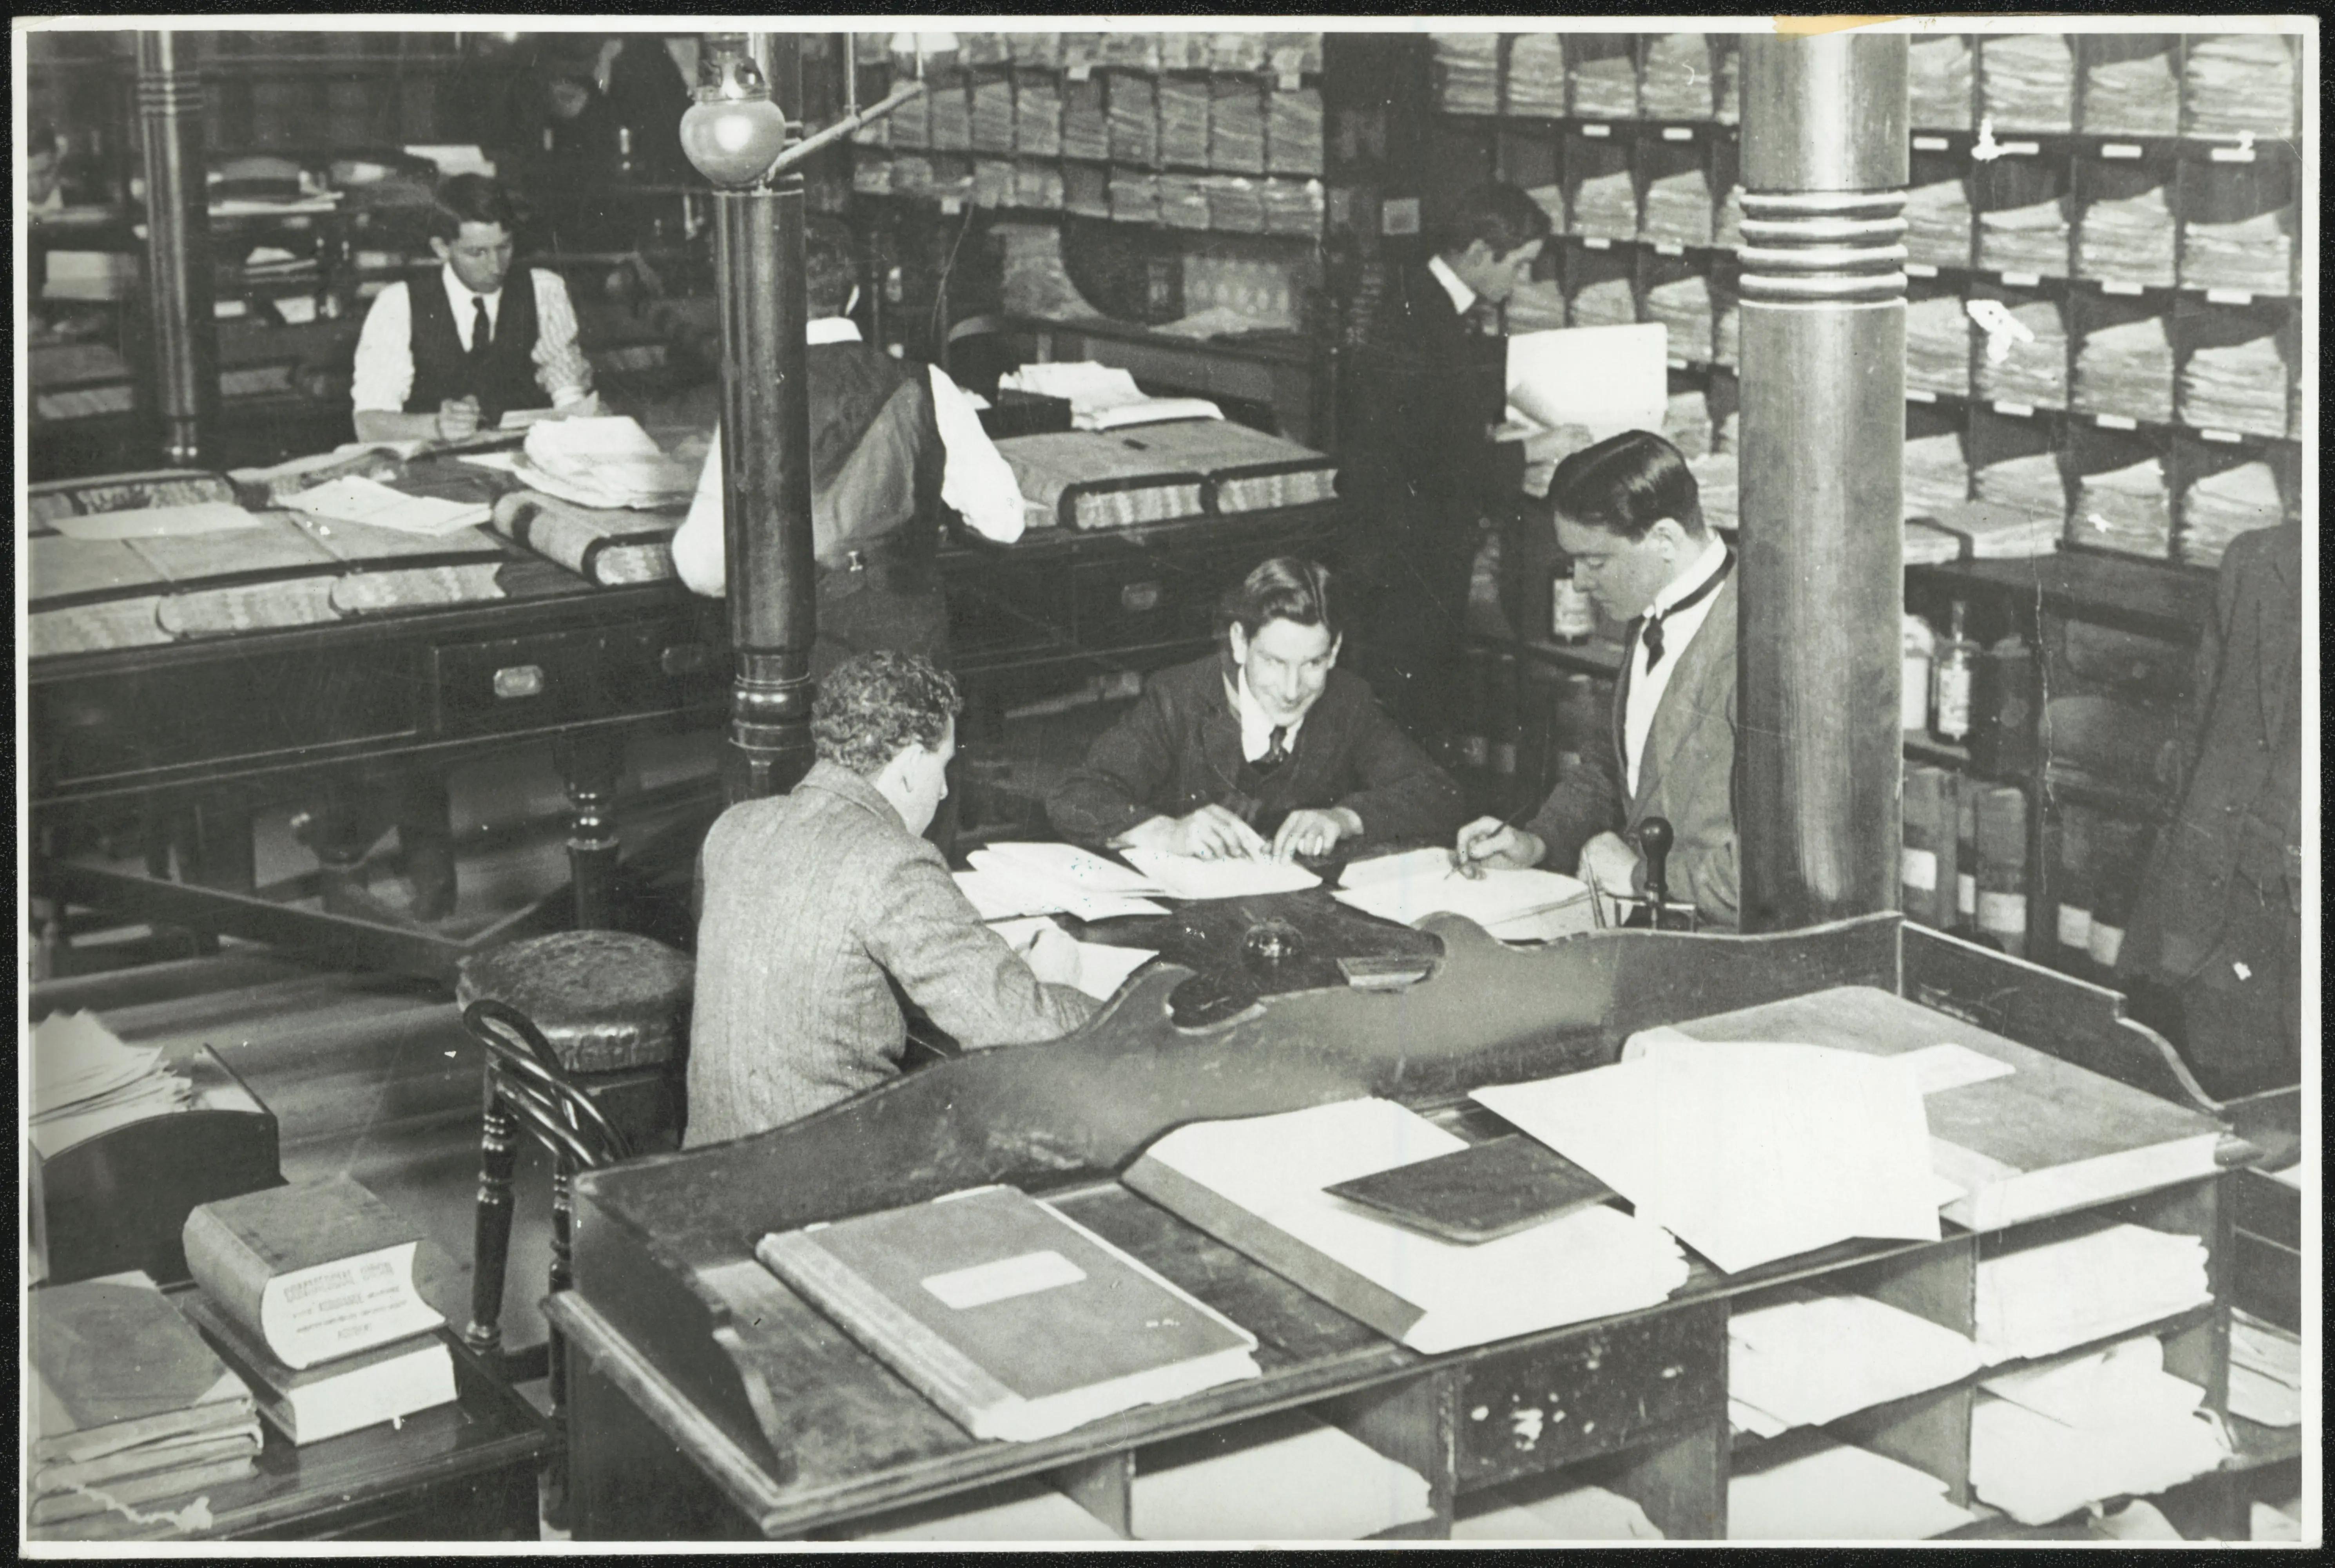 Black and white photo of clerks working at desks in an office, surrounded by large ledgers and pigeon holes and paperwork